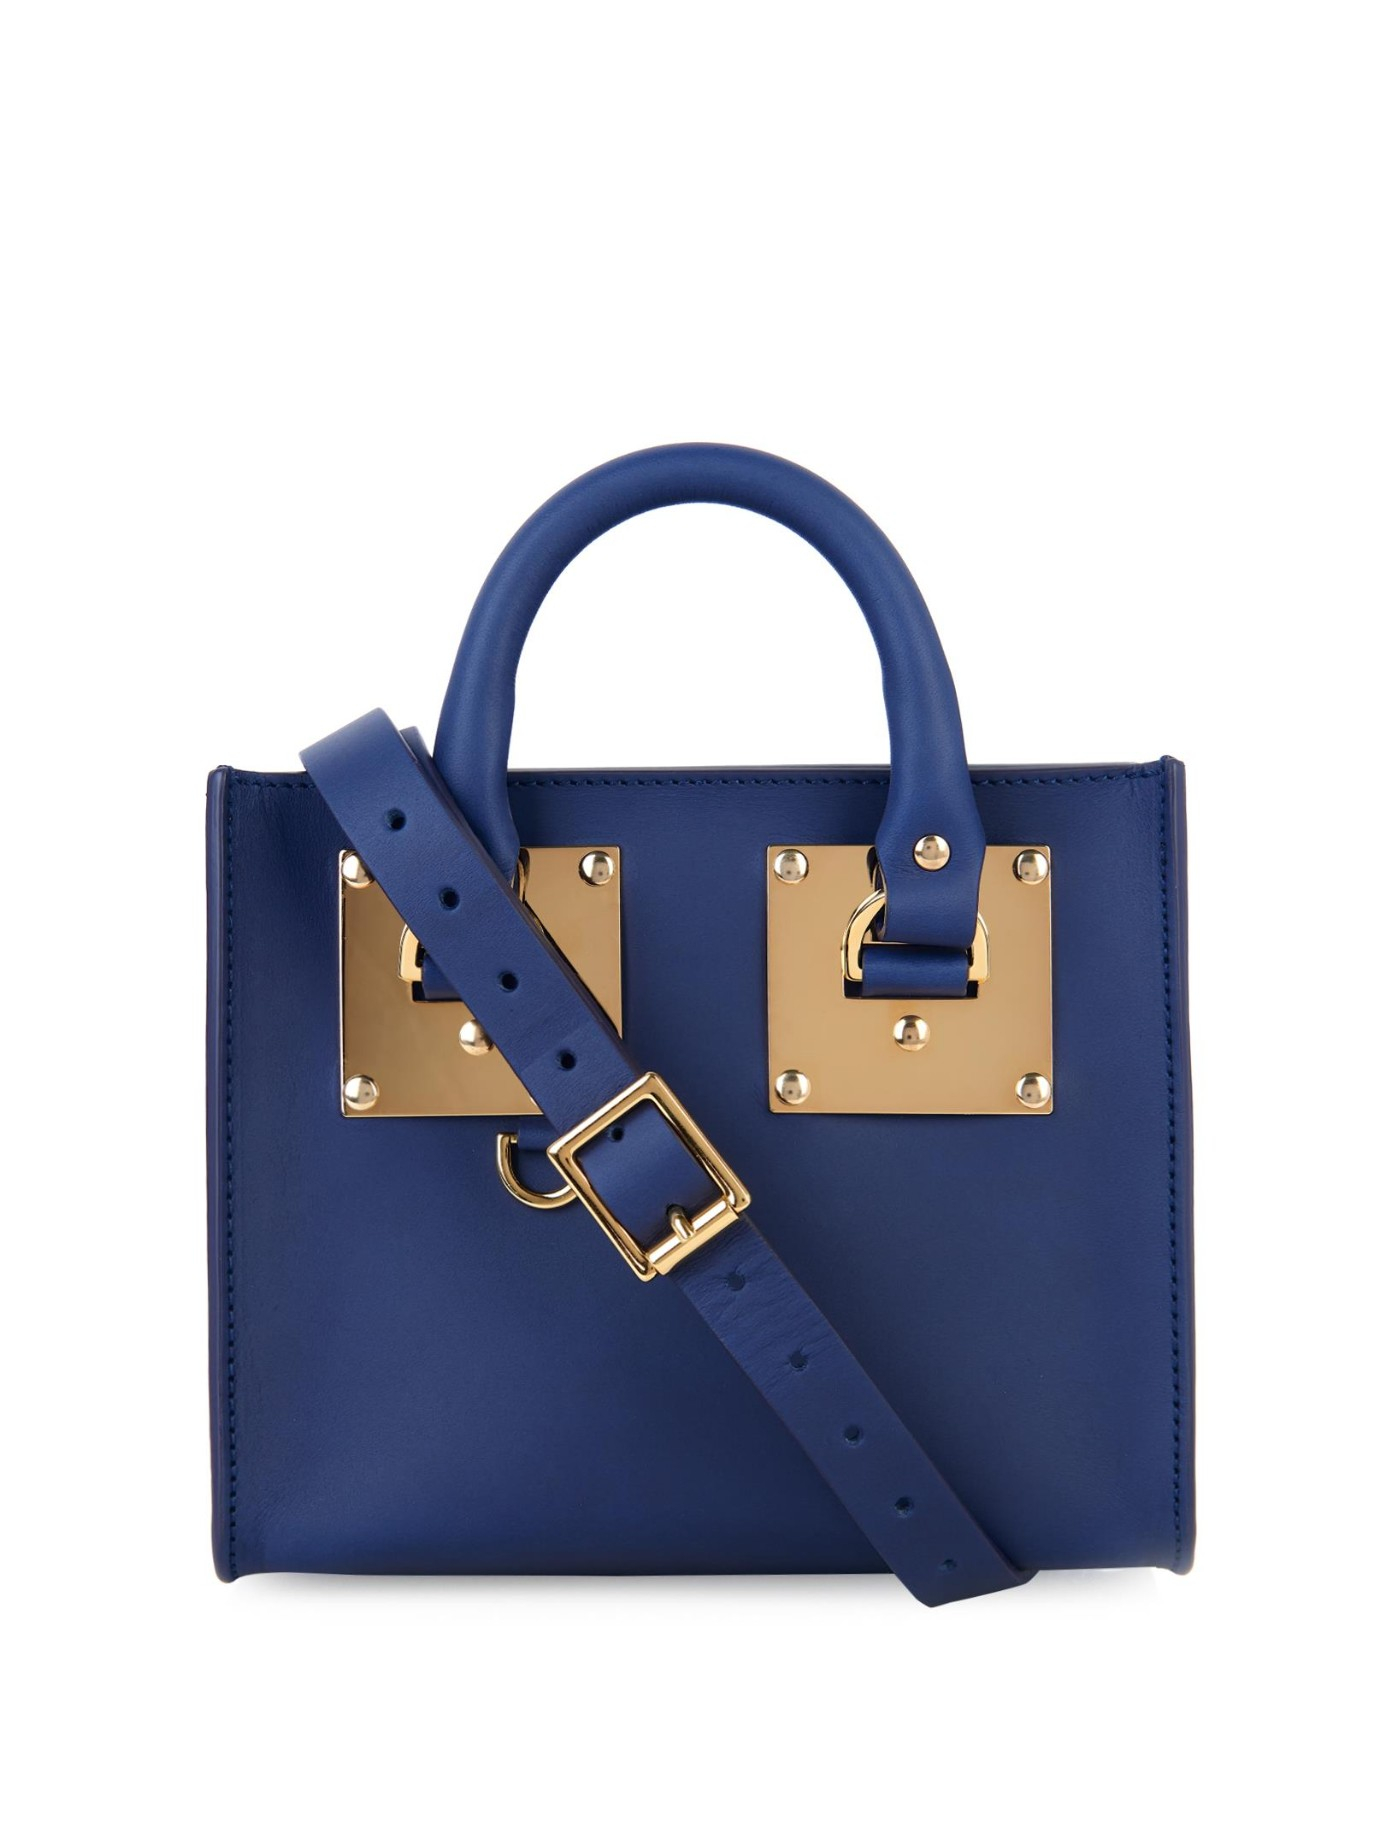 Sophie Hulme Box Albion Leather Cross-Body Bag in Blue | Lyst